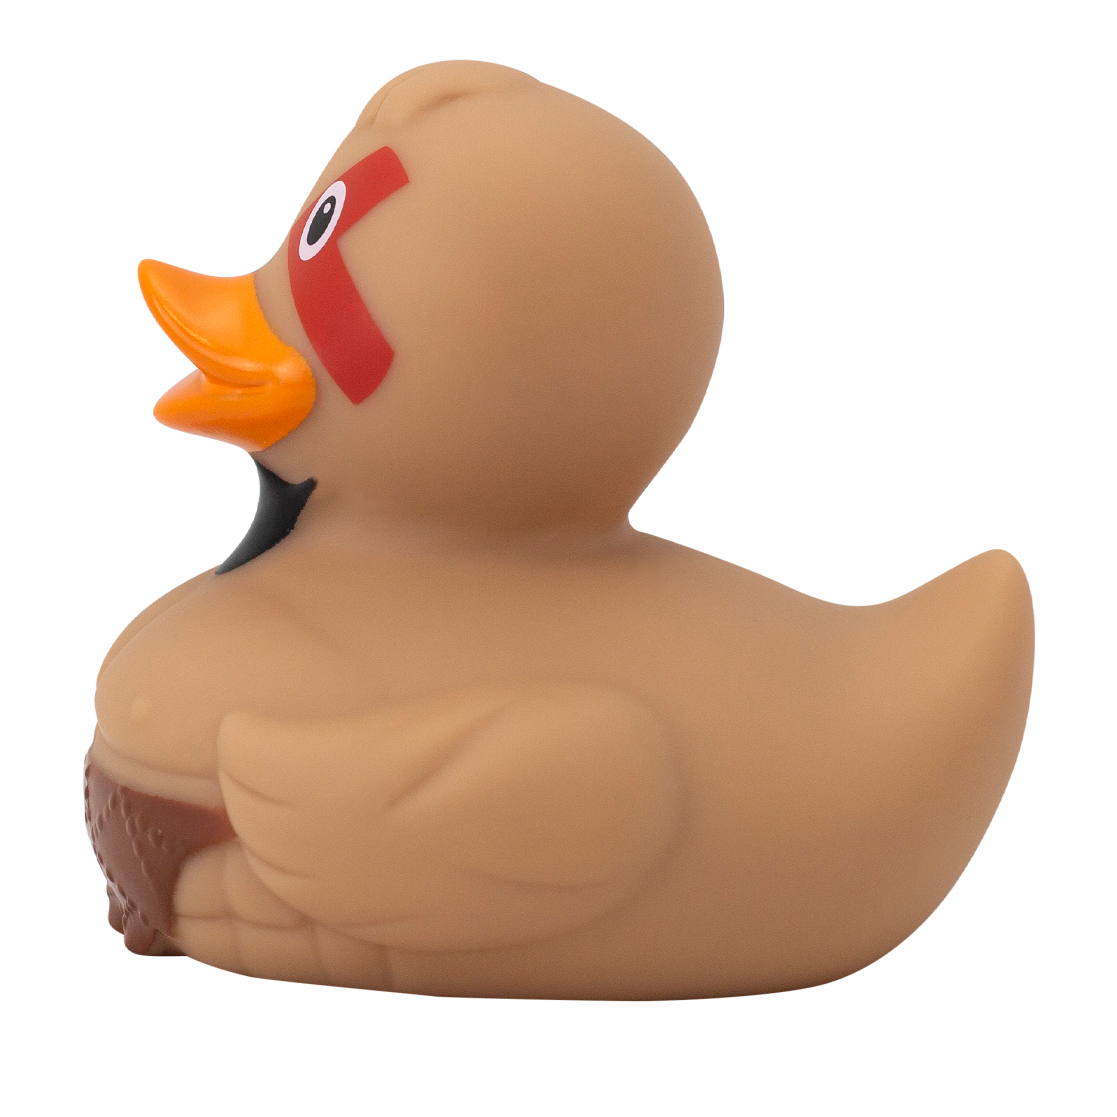 With lumbar protection and a large scar on the face, the rubber duck is per...